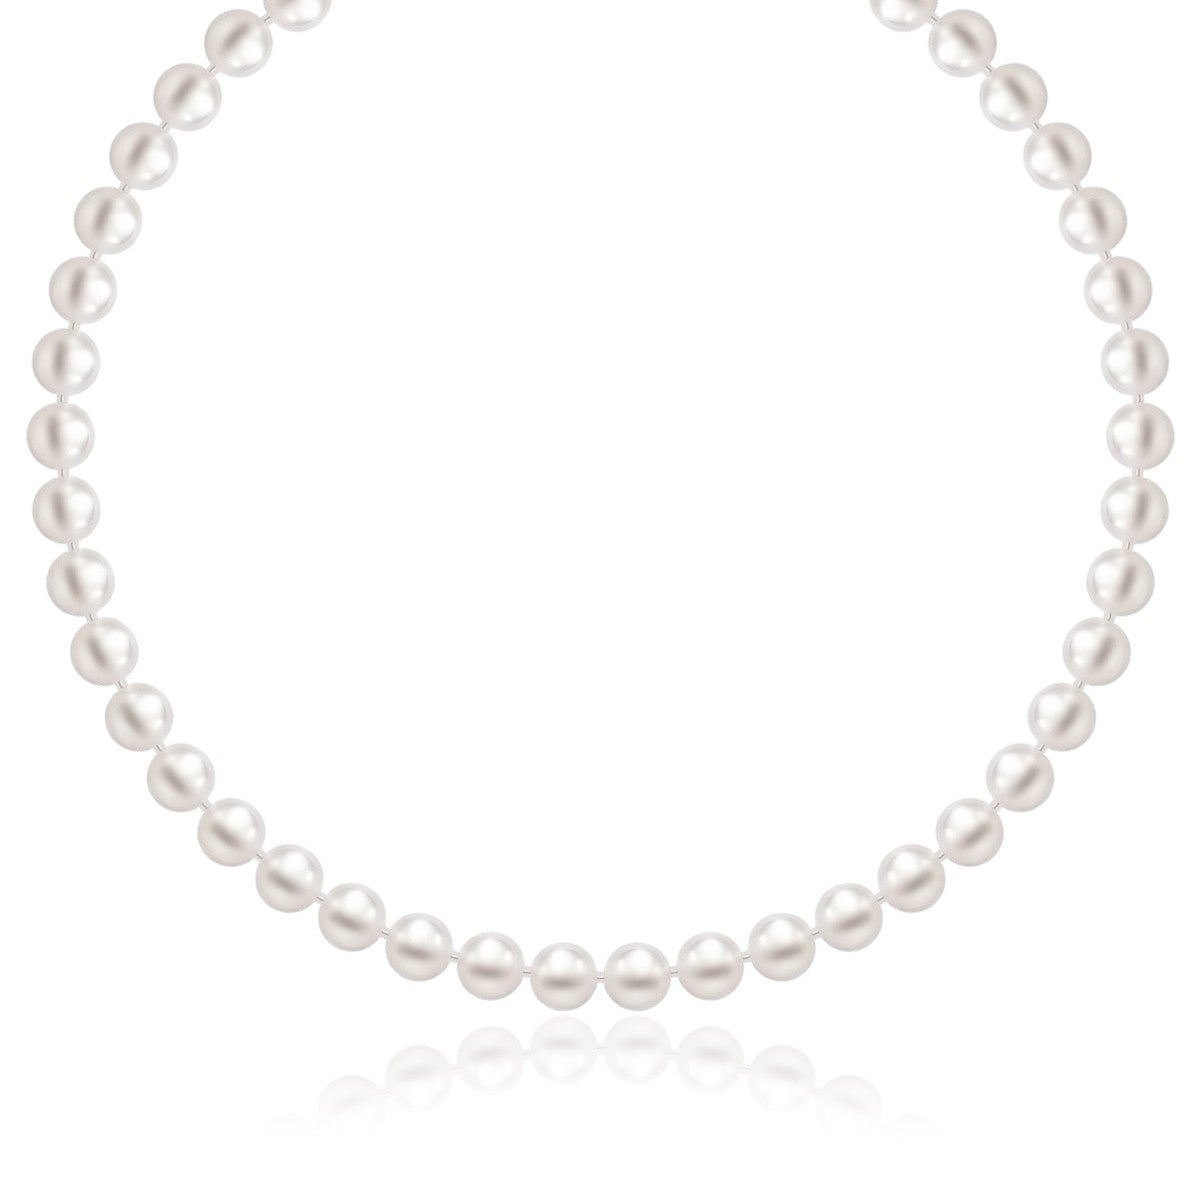 14k Yellow Gold Necklace with White Freshwater Cultured Pearls (6.0mm-6.5mm)